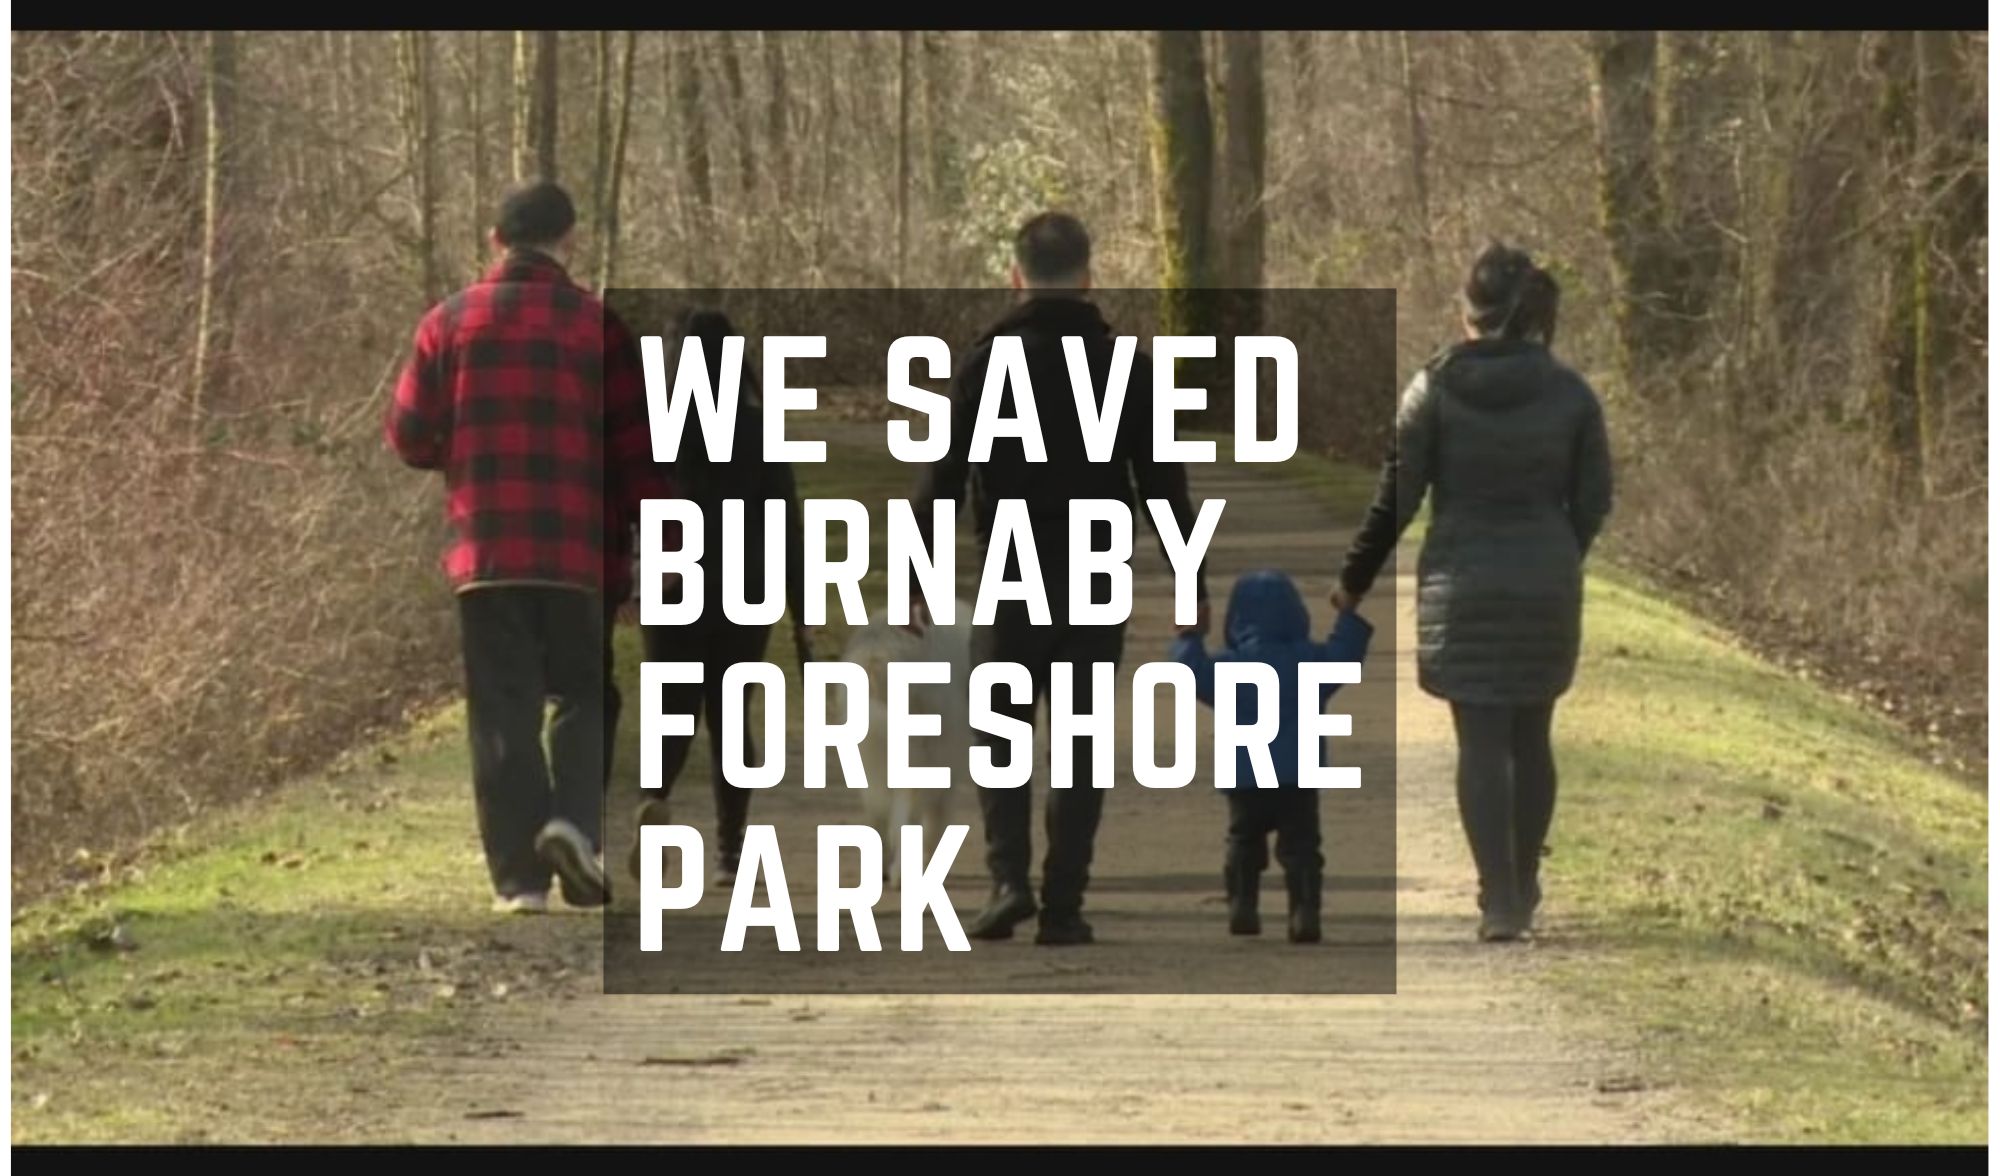 We came together as a community and saved Burnaby Foreshore Park – There is no power for change greater than a community discovering what it cares about